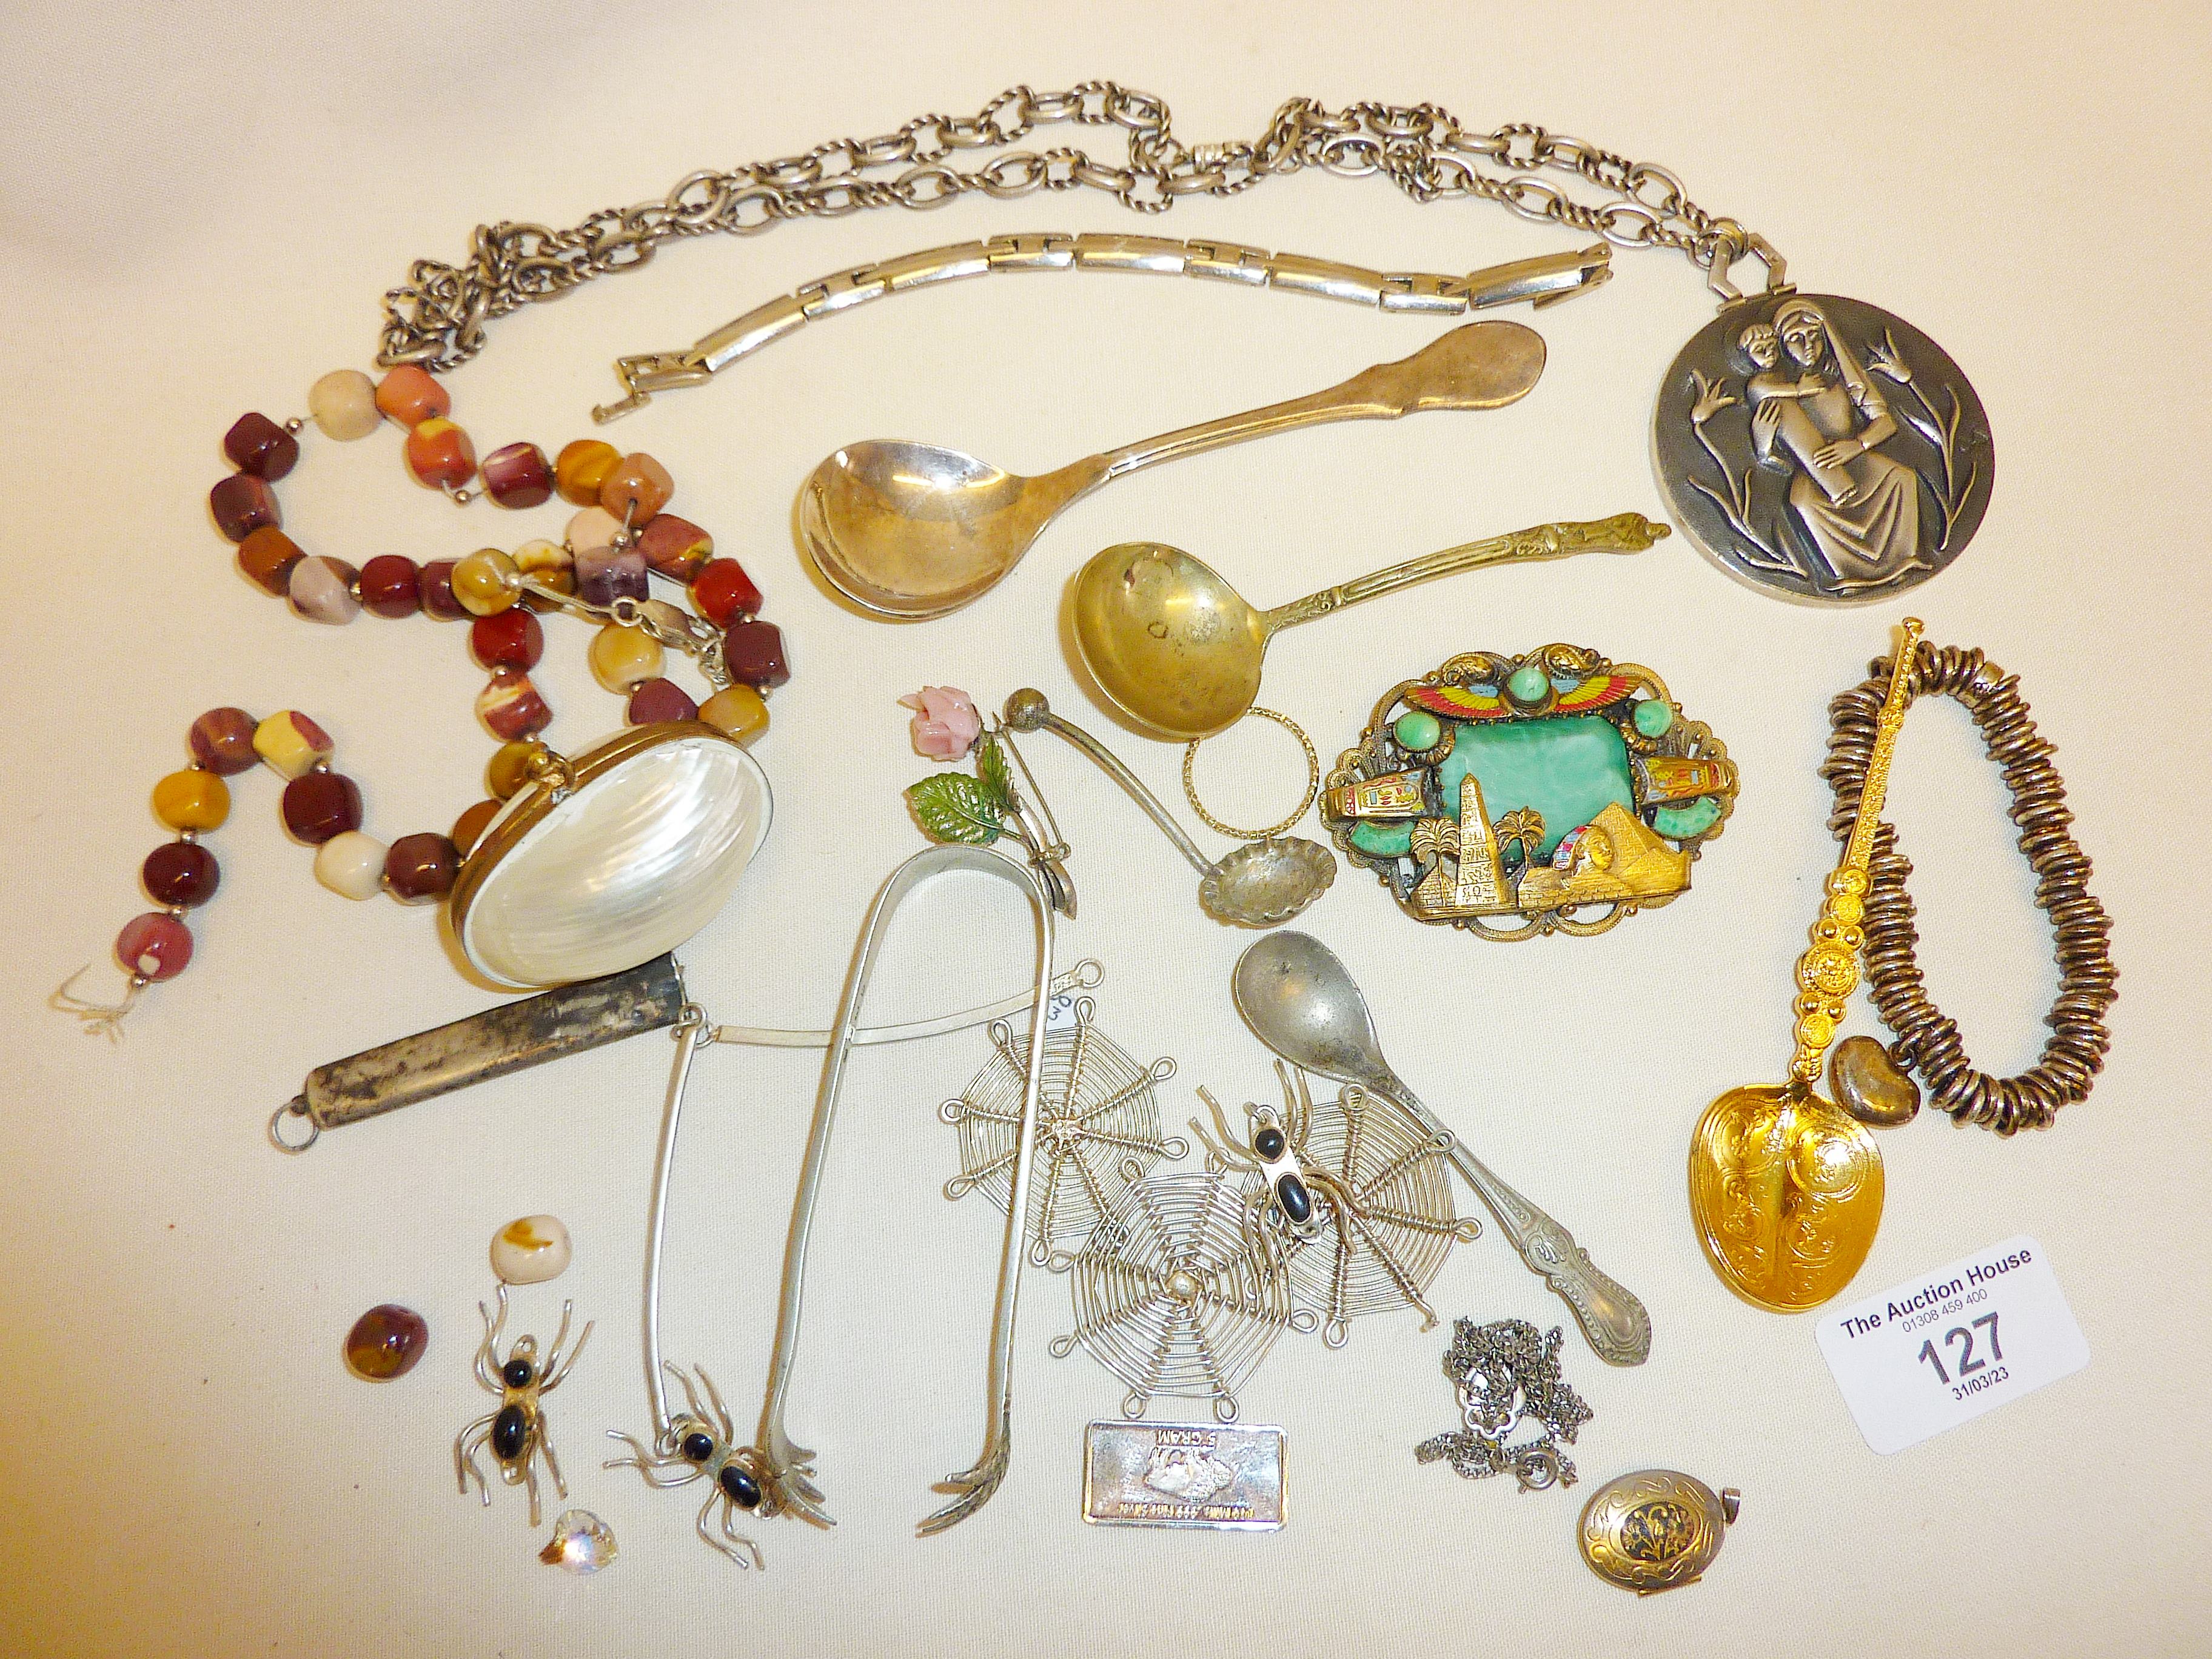 Vintage costume jewellery and spoons, inc. a 1920s Neiger Bros.? Egyptian Revival brooch, and a